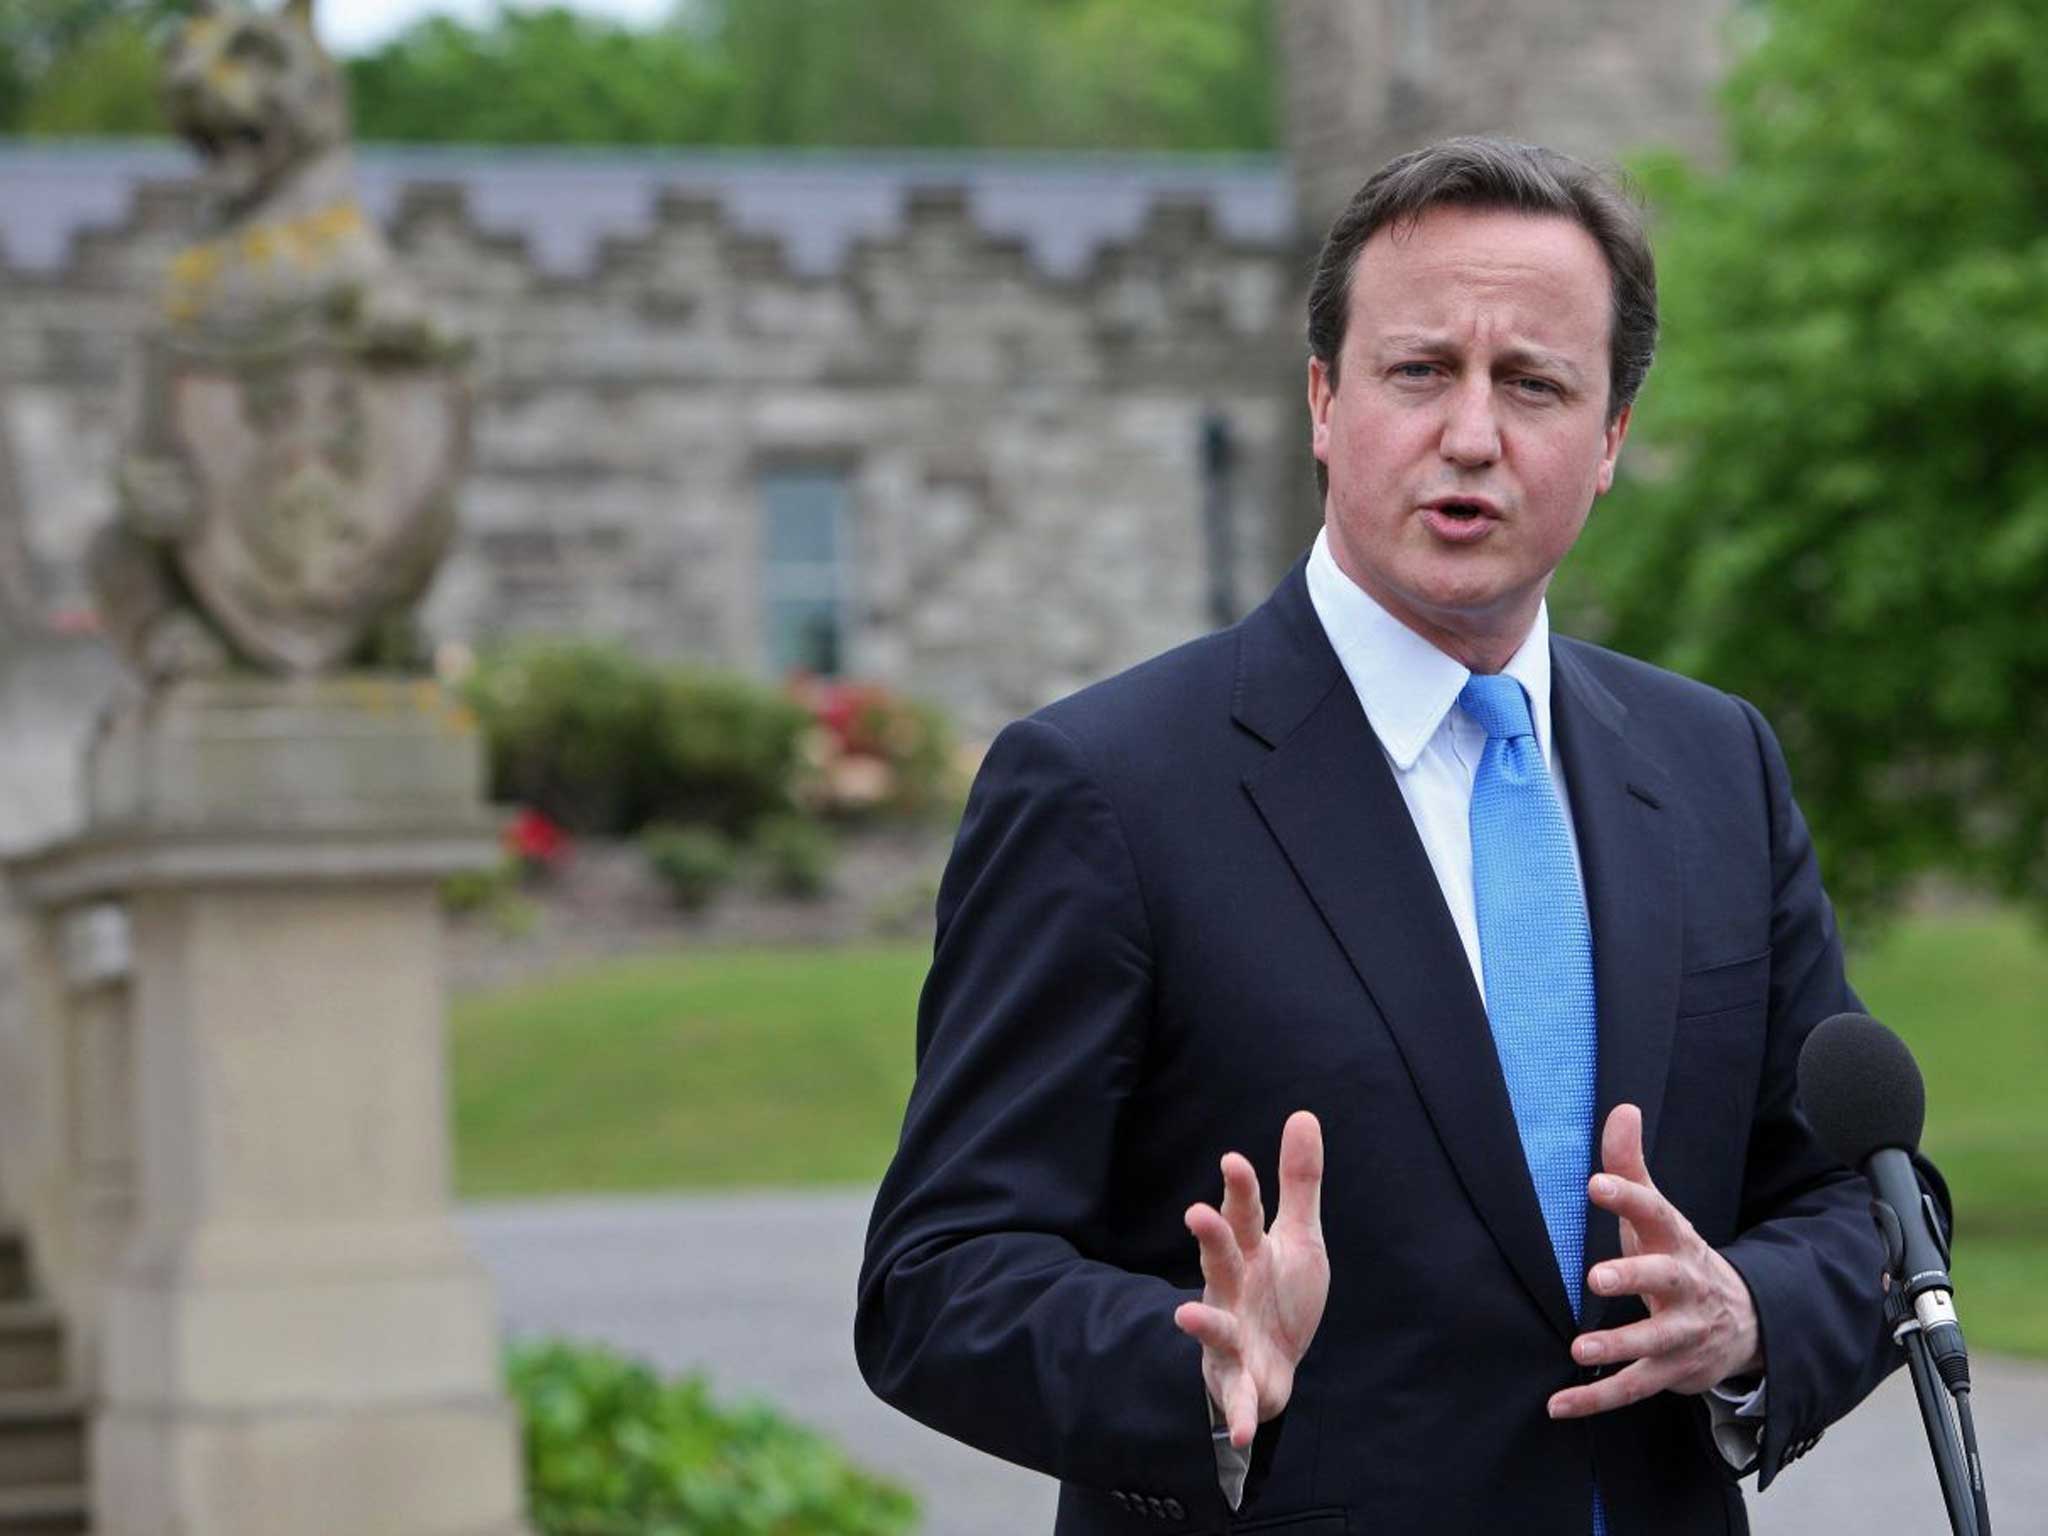 The Prime Minister's original message appears to have vanished, according to Mr Miliband